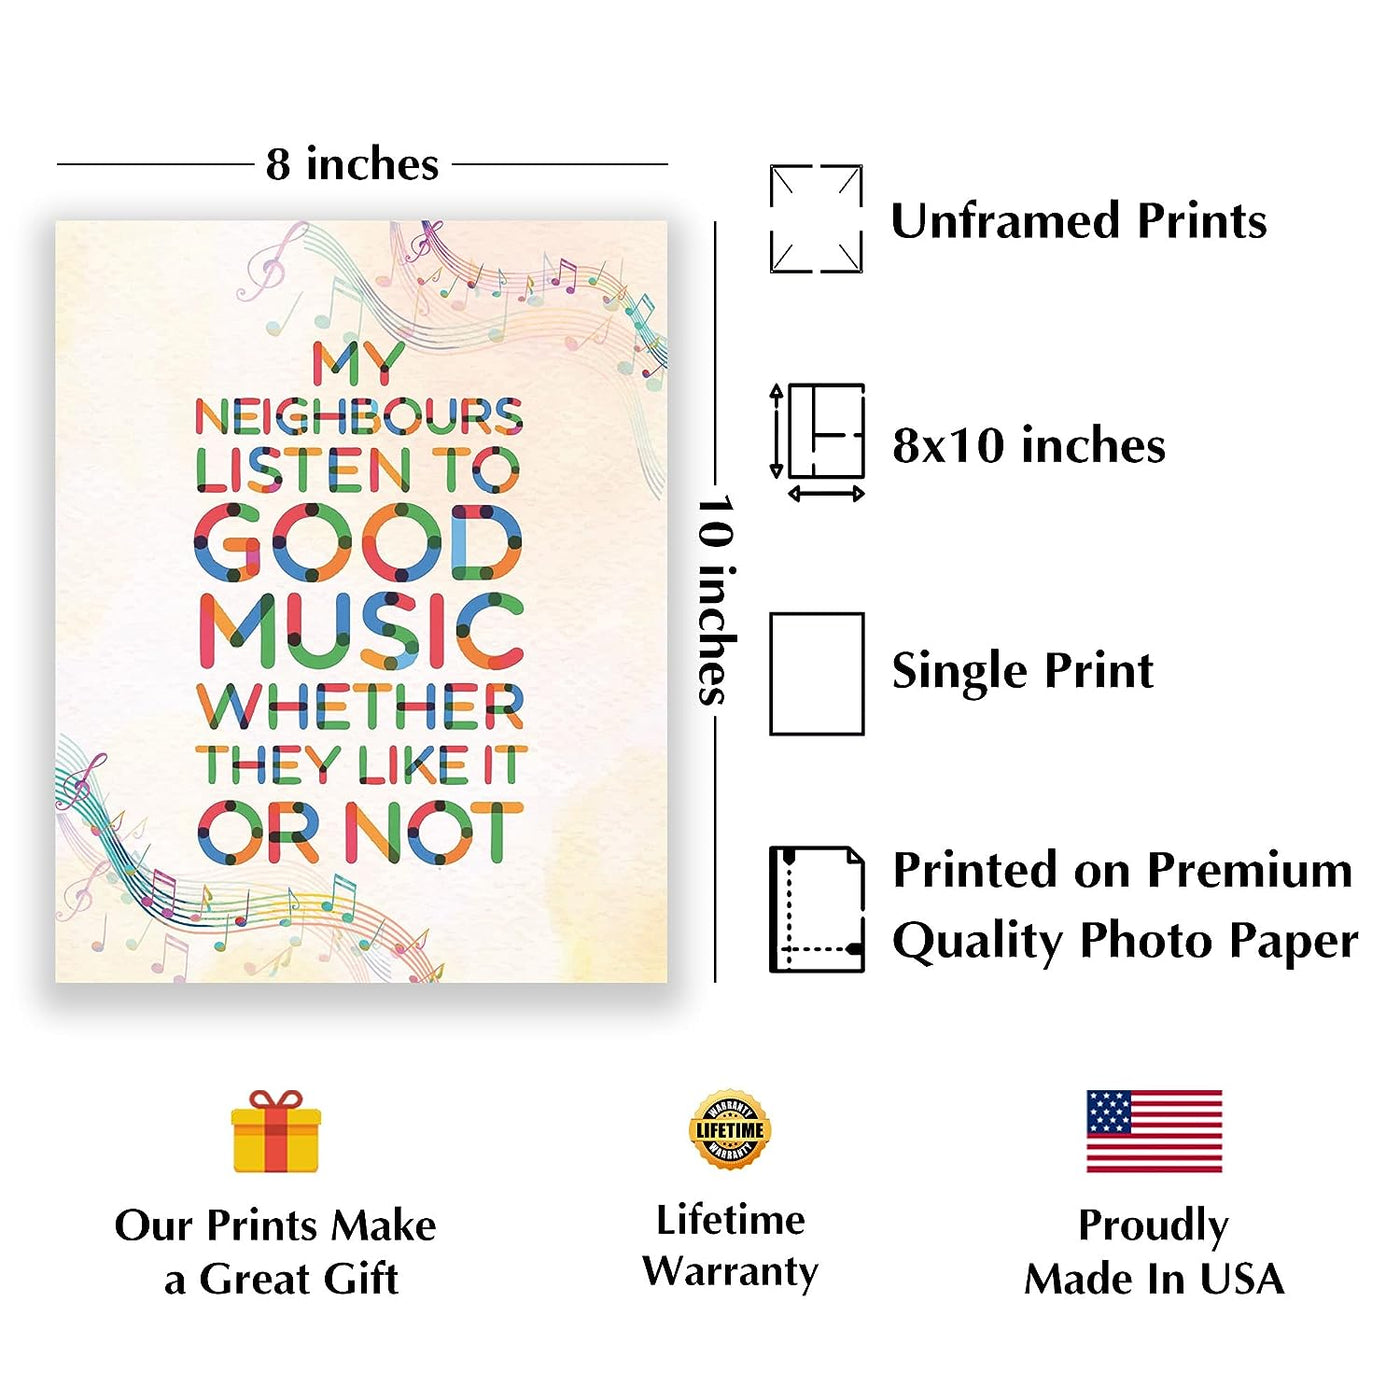 My Neighbors Listen To Good Music Whether They Like It or Not! Funny Wall Art- 8 x 10"-Typographic Wall Print- Ready To Frame. Home Decor- Bar Additions- Man Cave Decor. Perfect for All Music Fans.